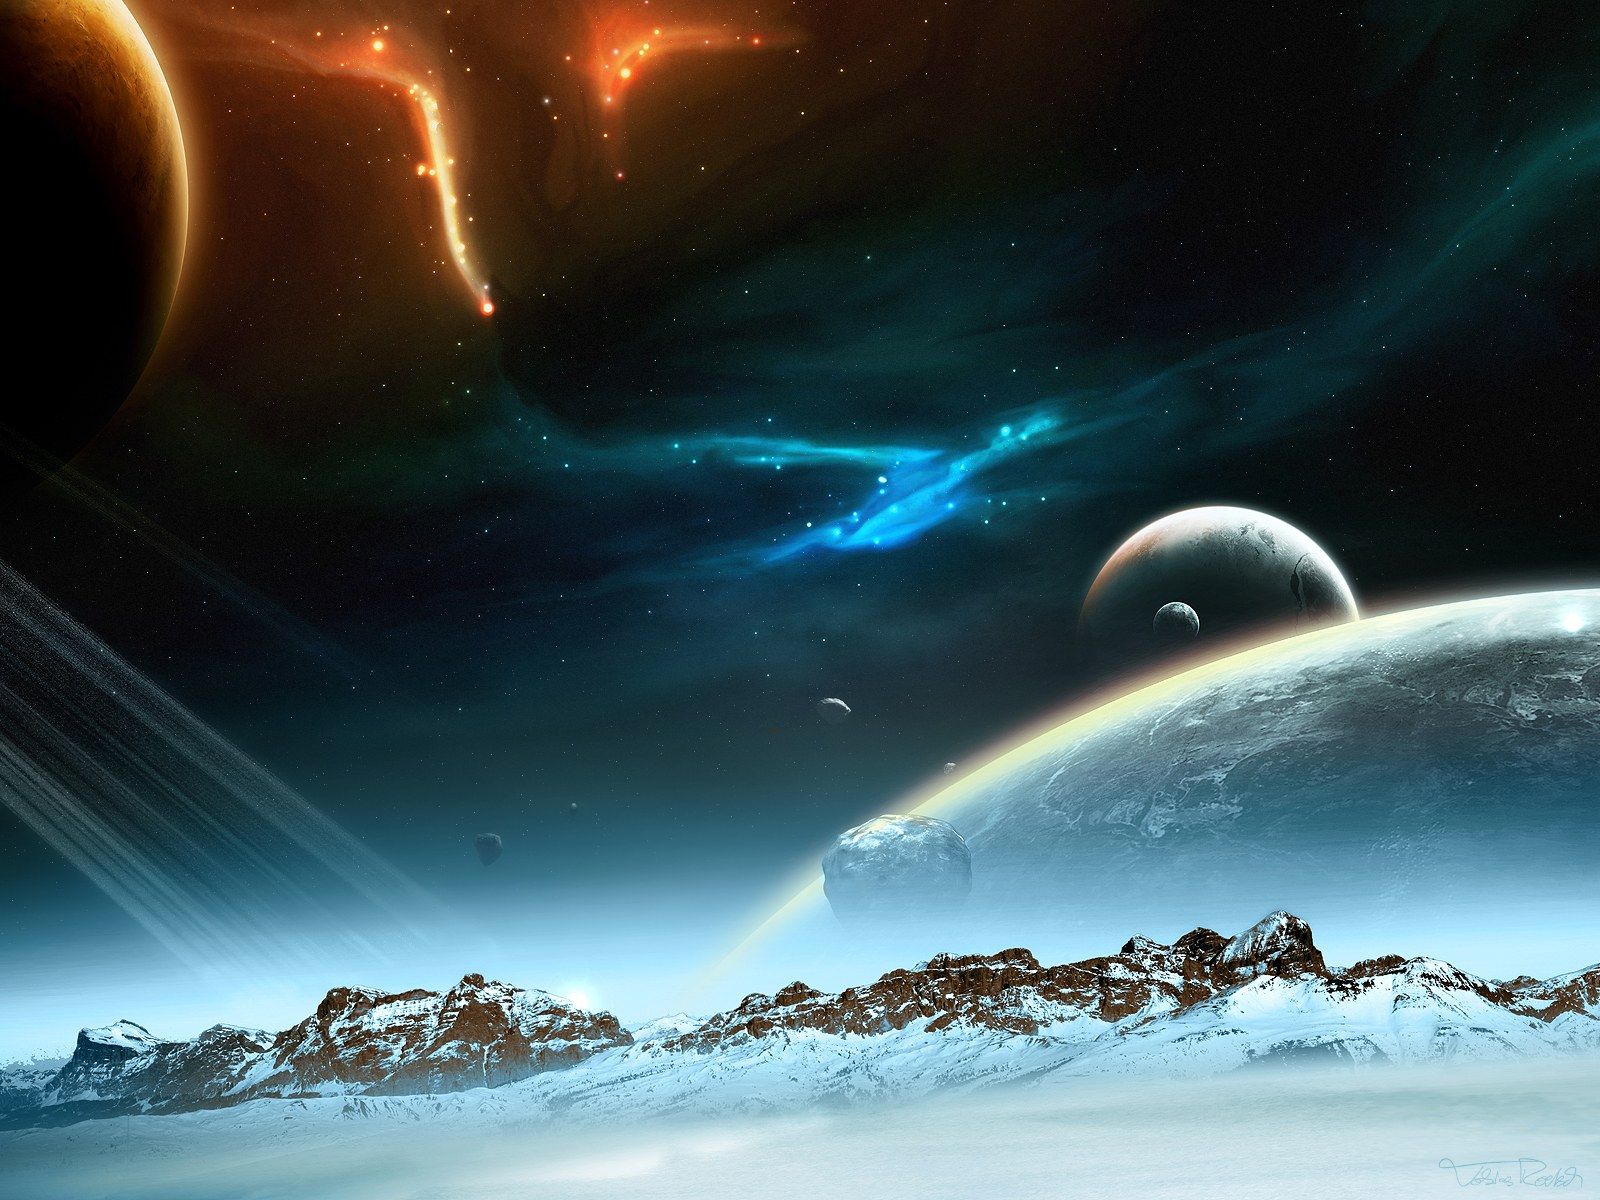 HD universe and planets digital art wallpapers 1600x1200 NO.17 ...